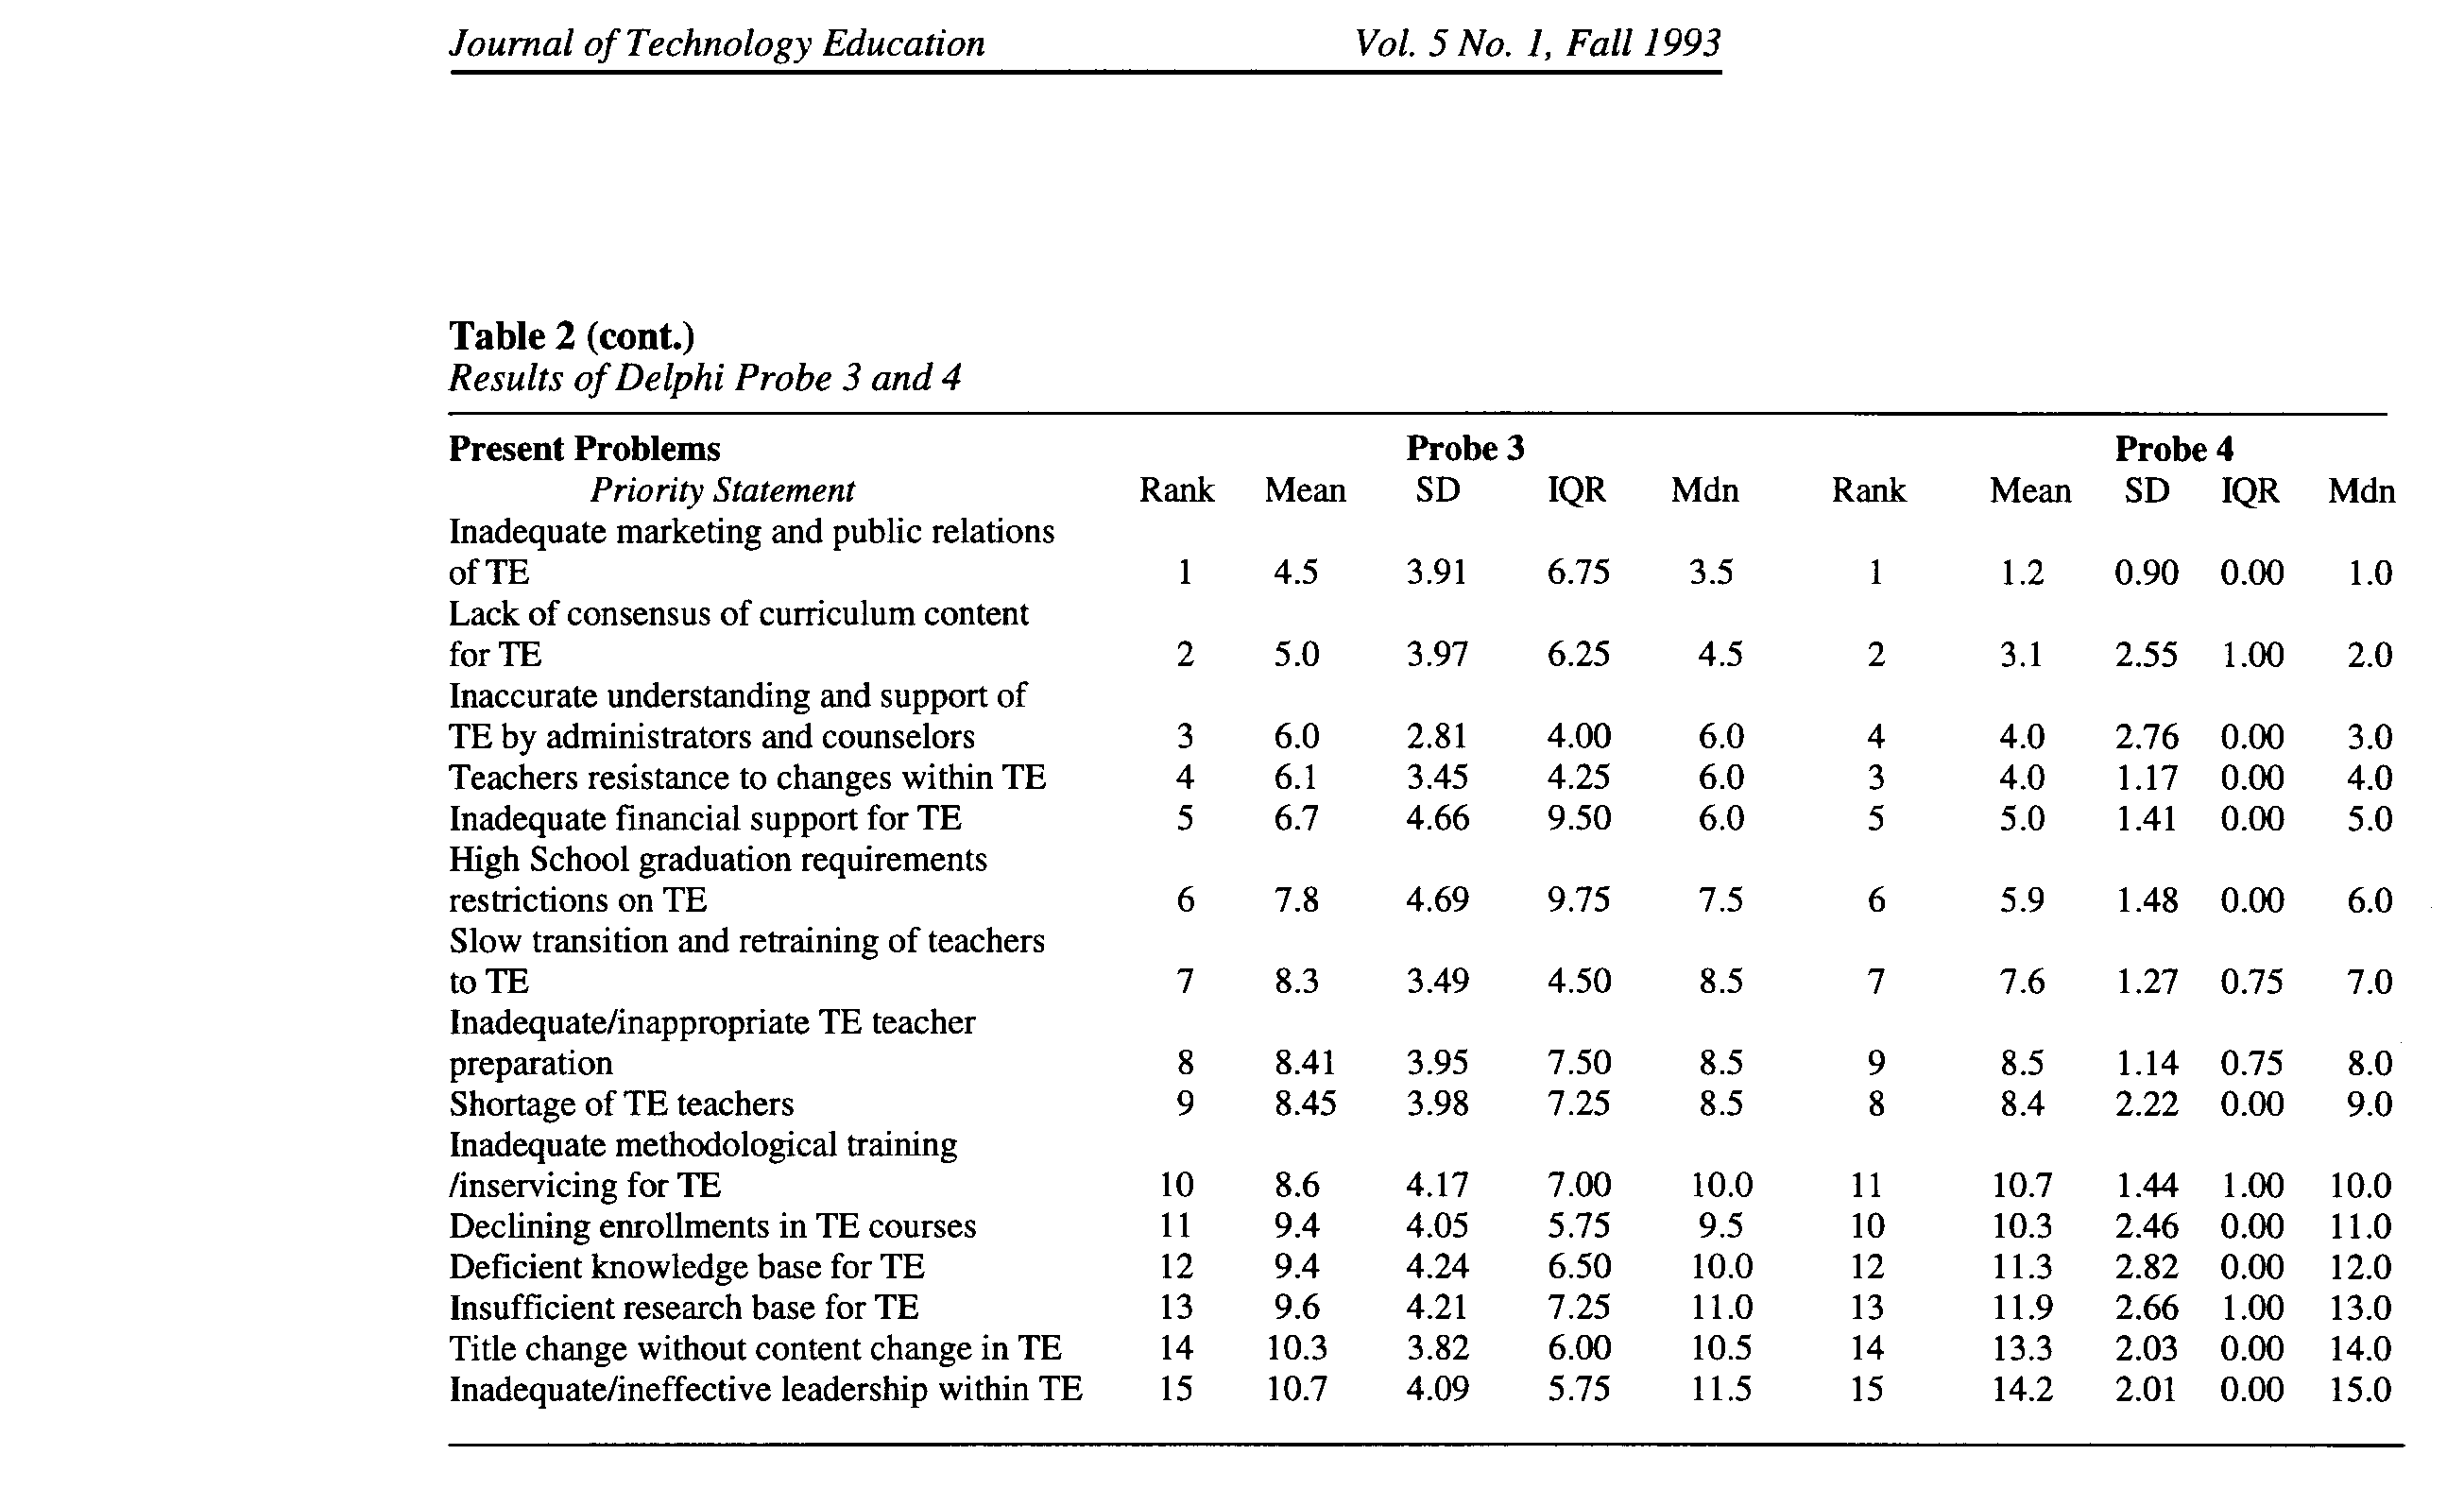 Table 2. (cont.) Results of Delphi Probe 3 and 4